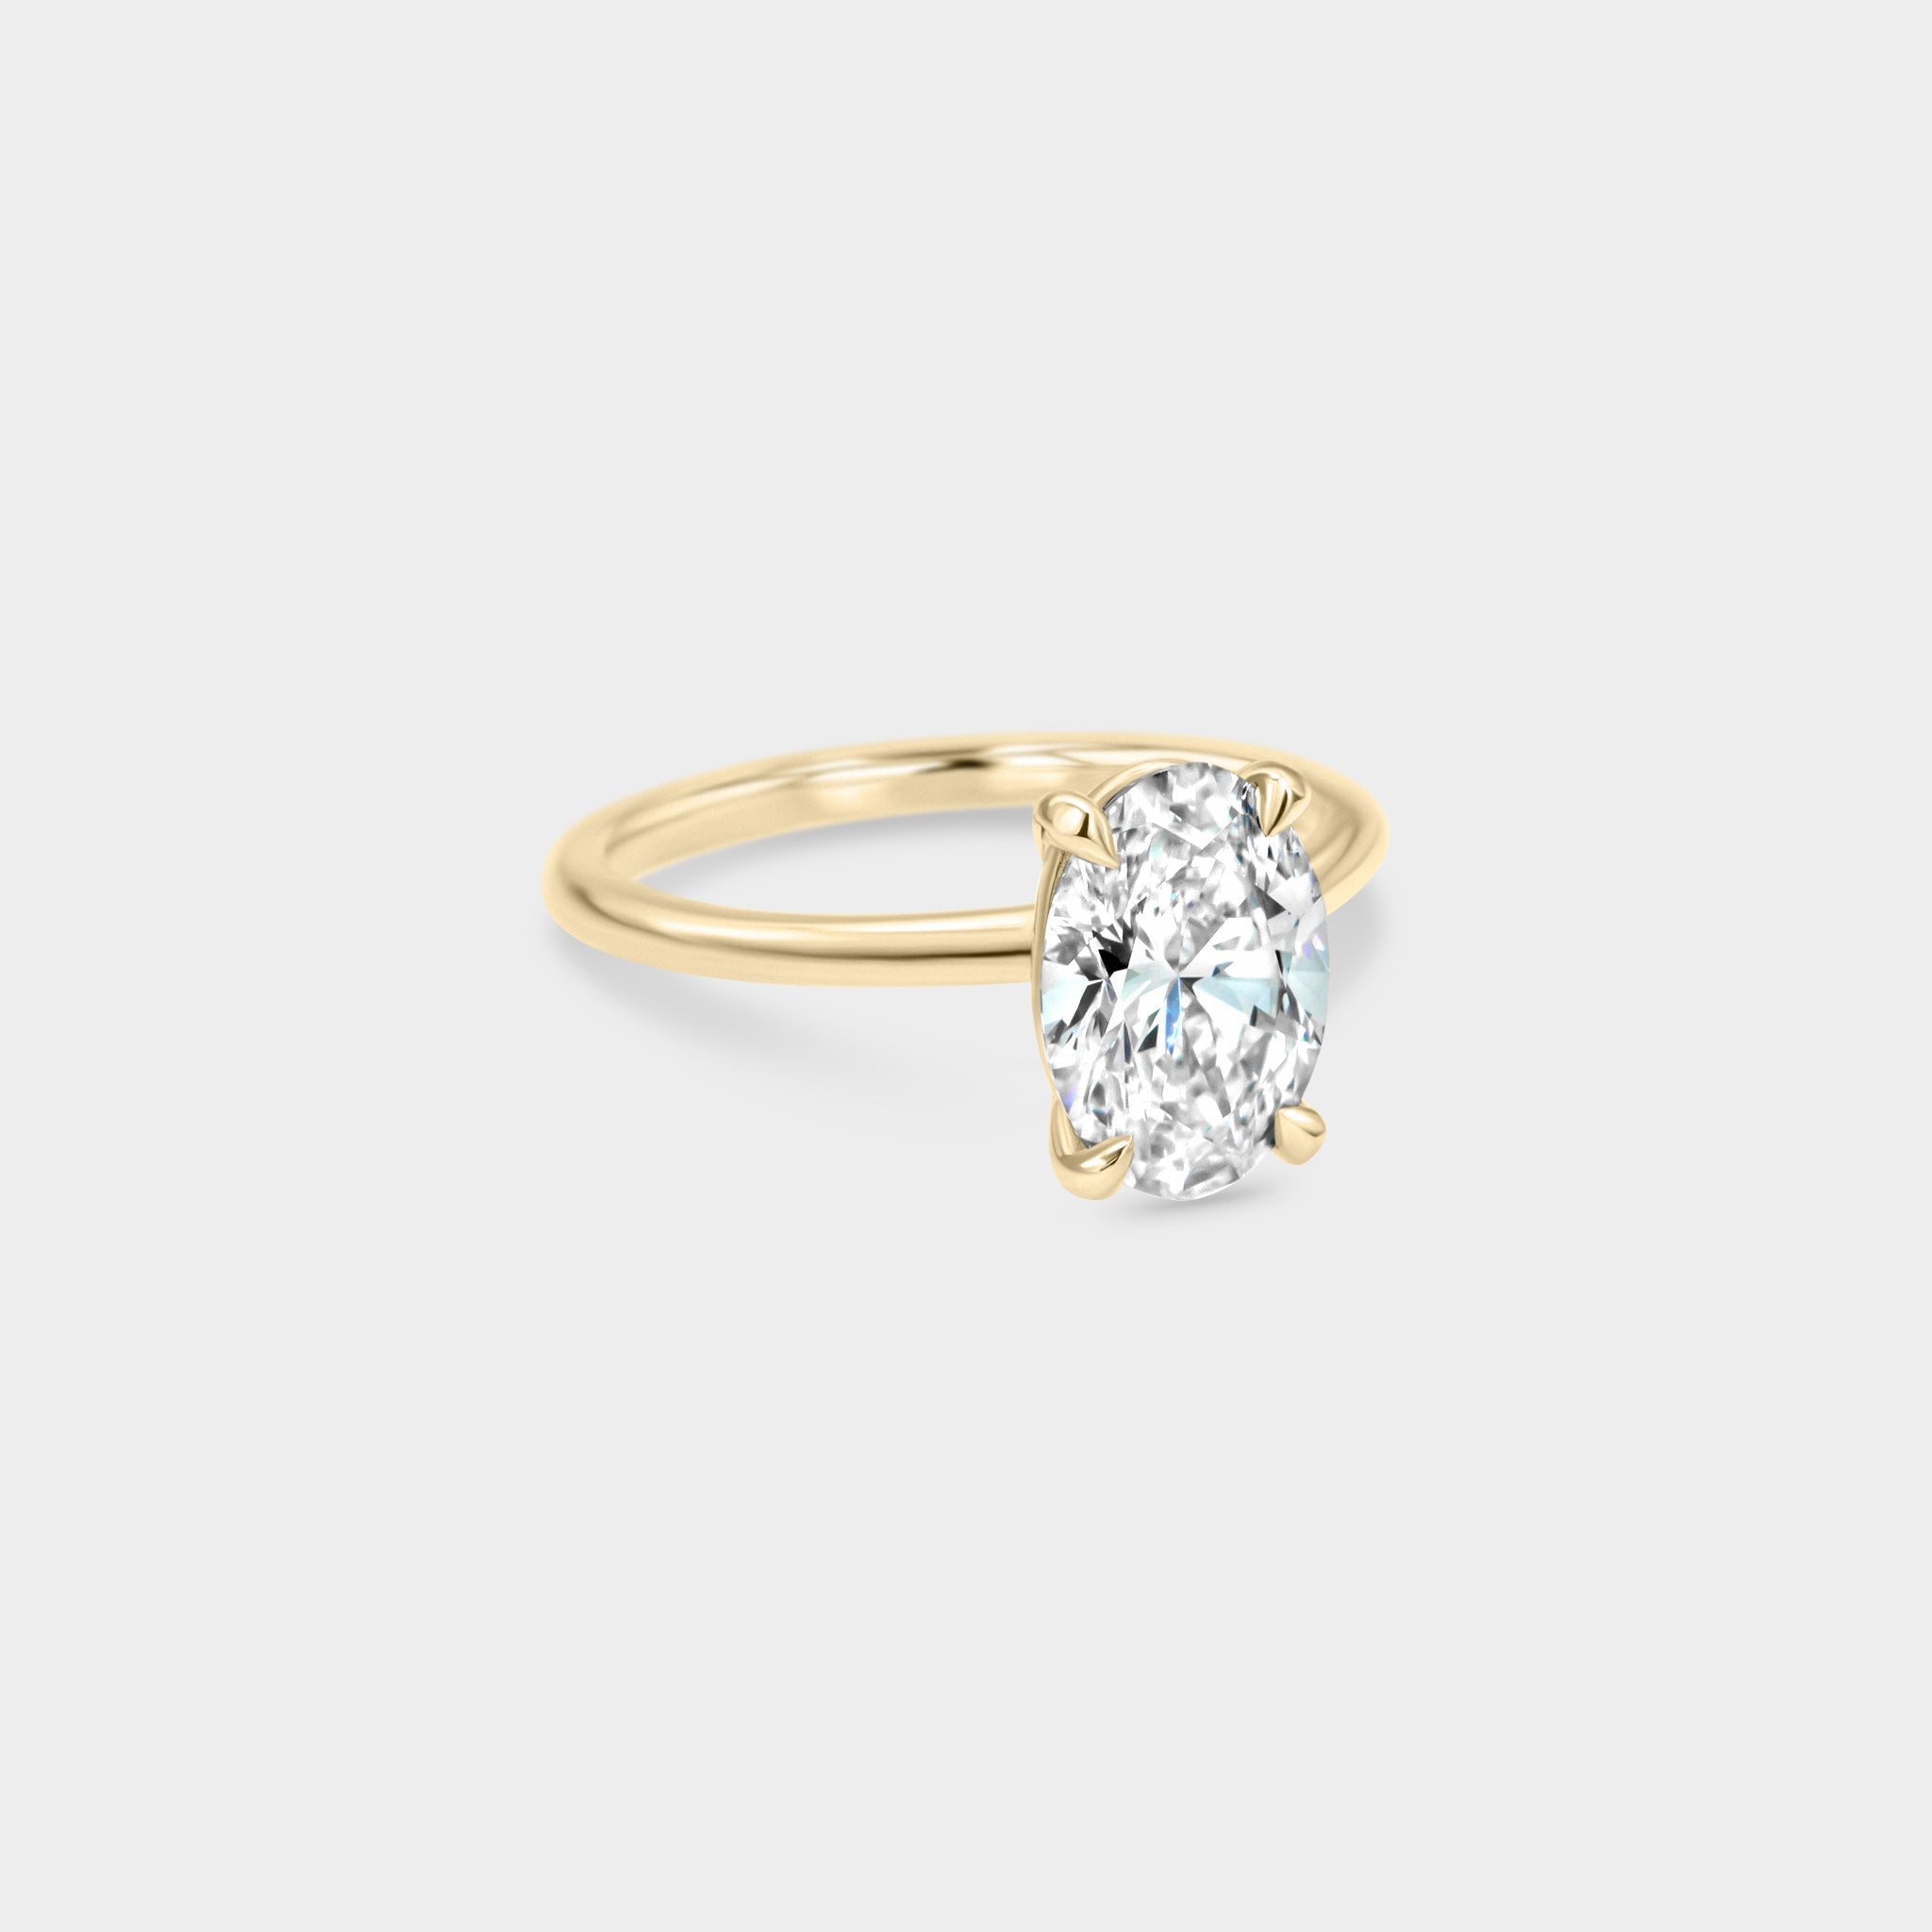 Solitaire of LAB GROWN Oval Diamond - Laher -